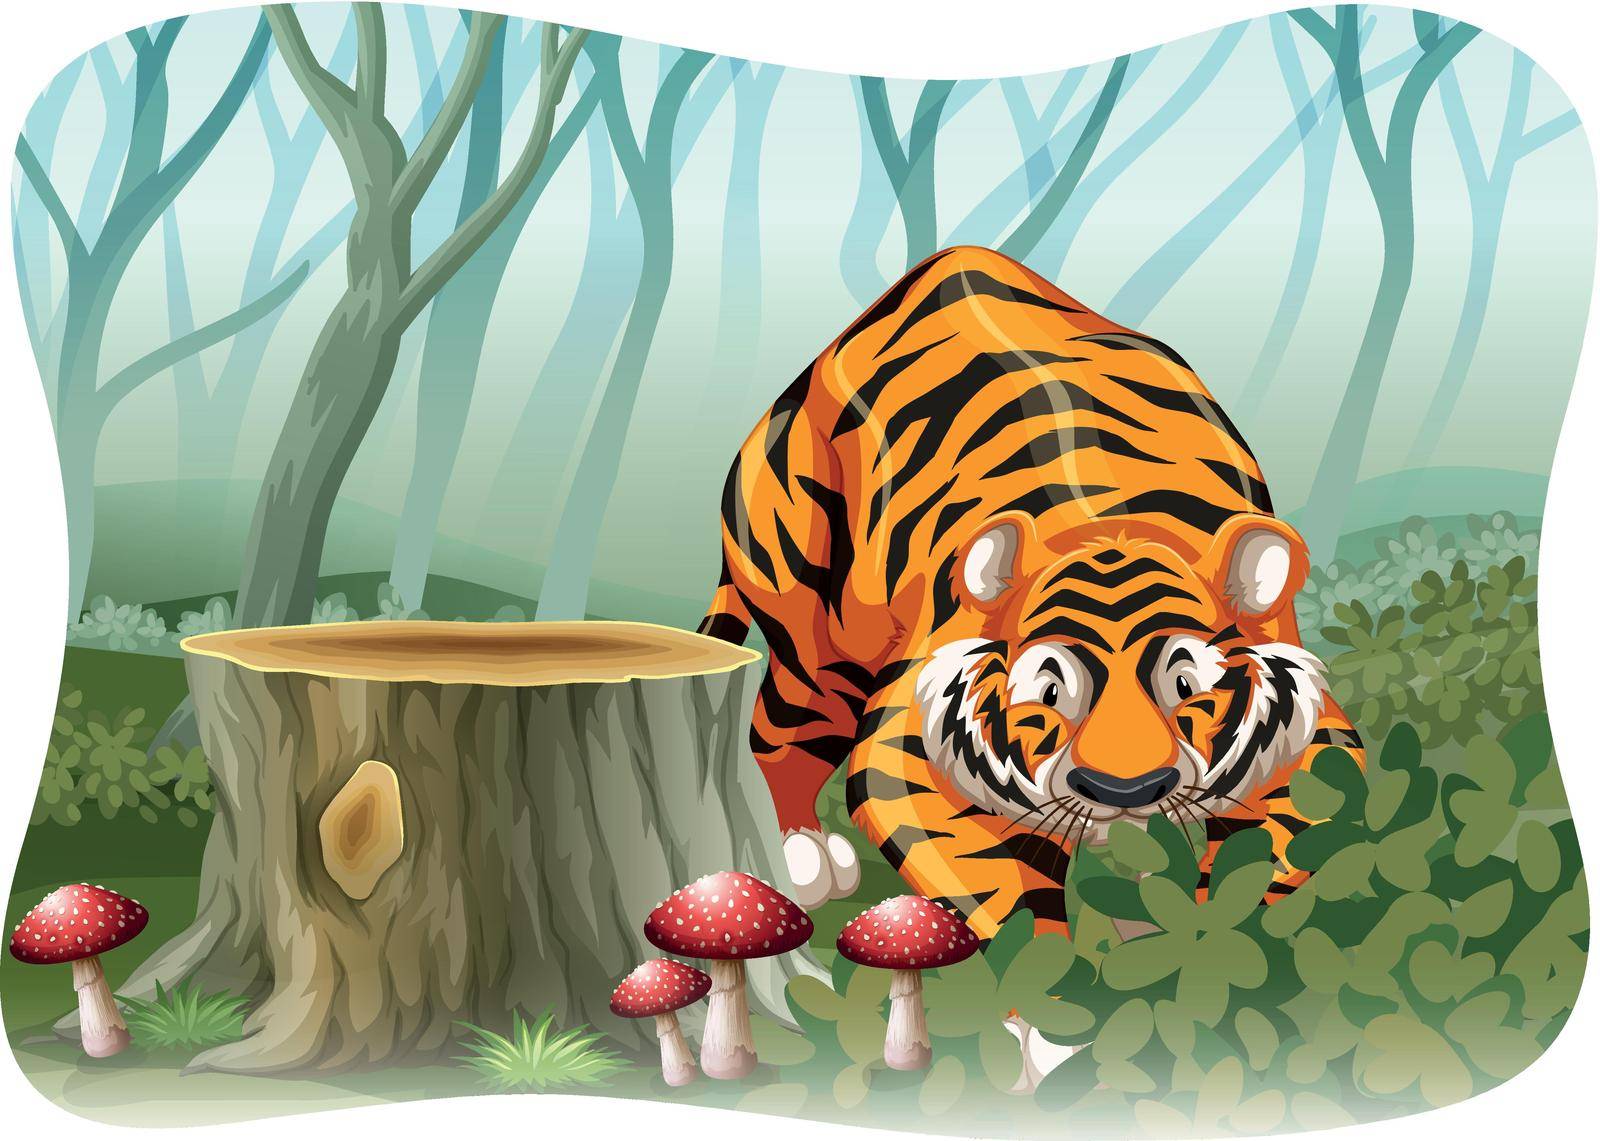 Tiger walking in a jungle with plants and mushrooms around